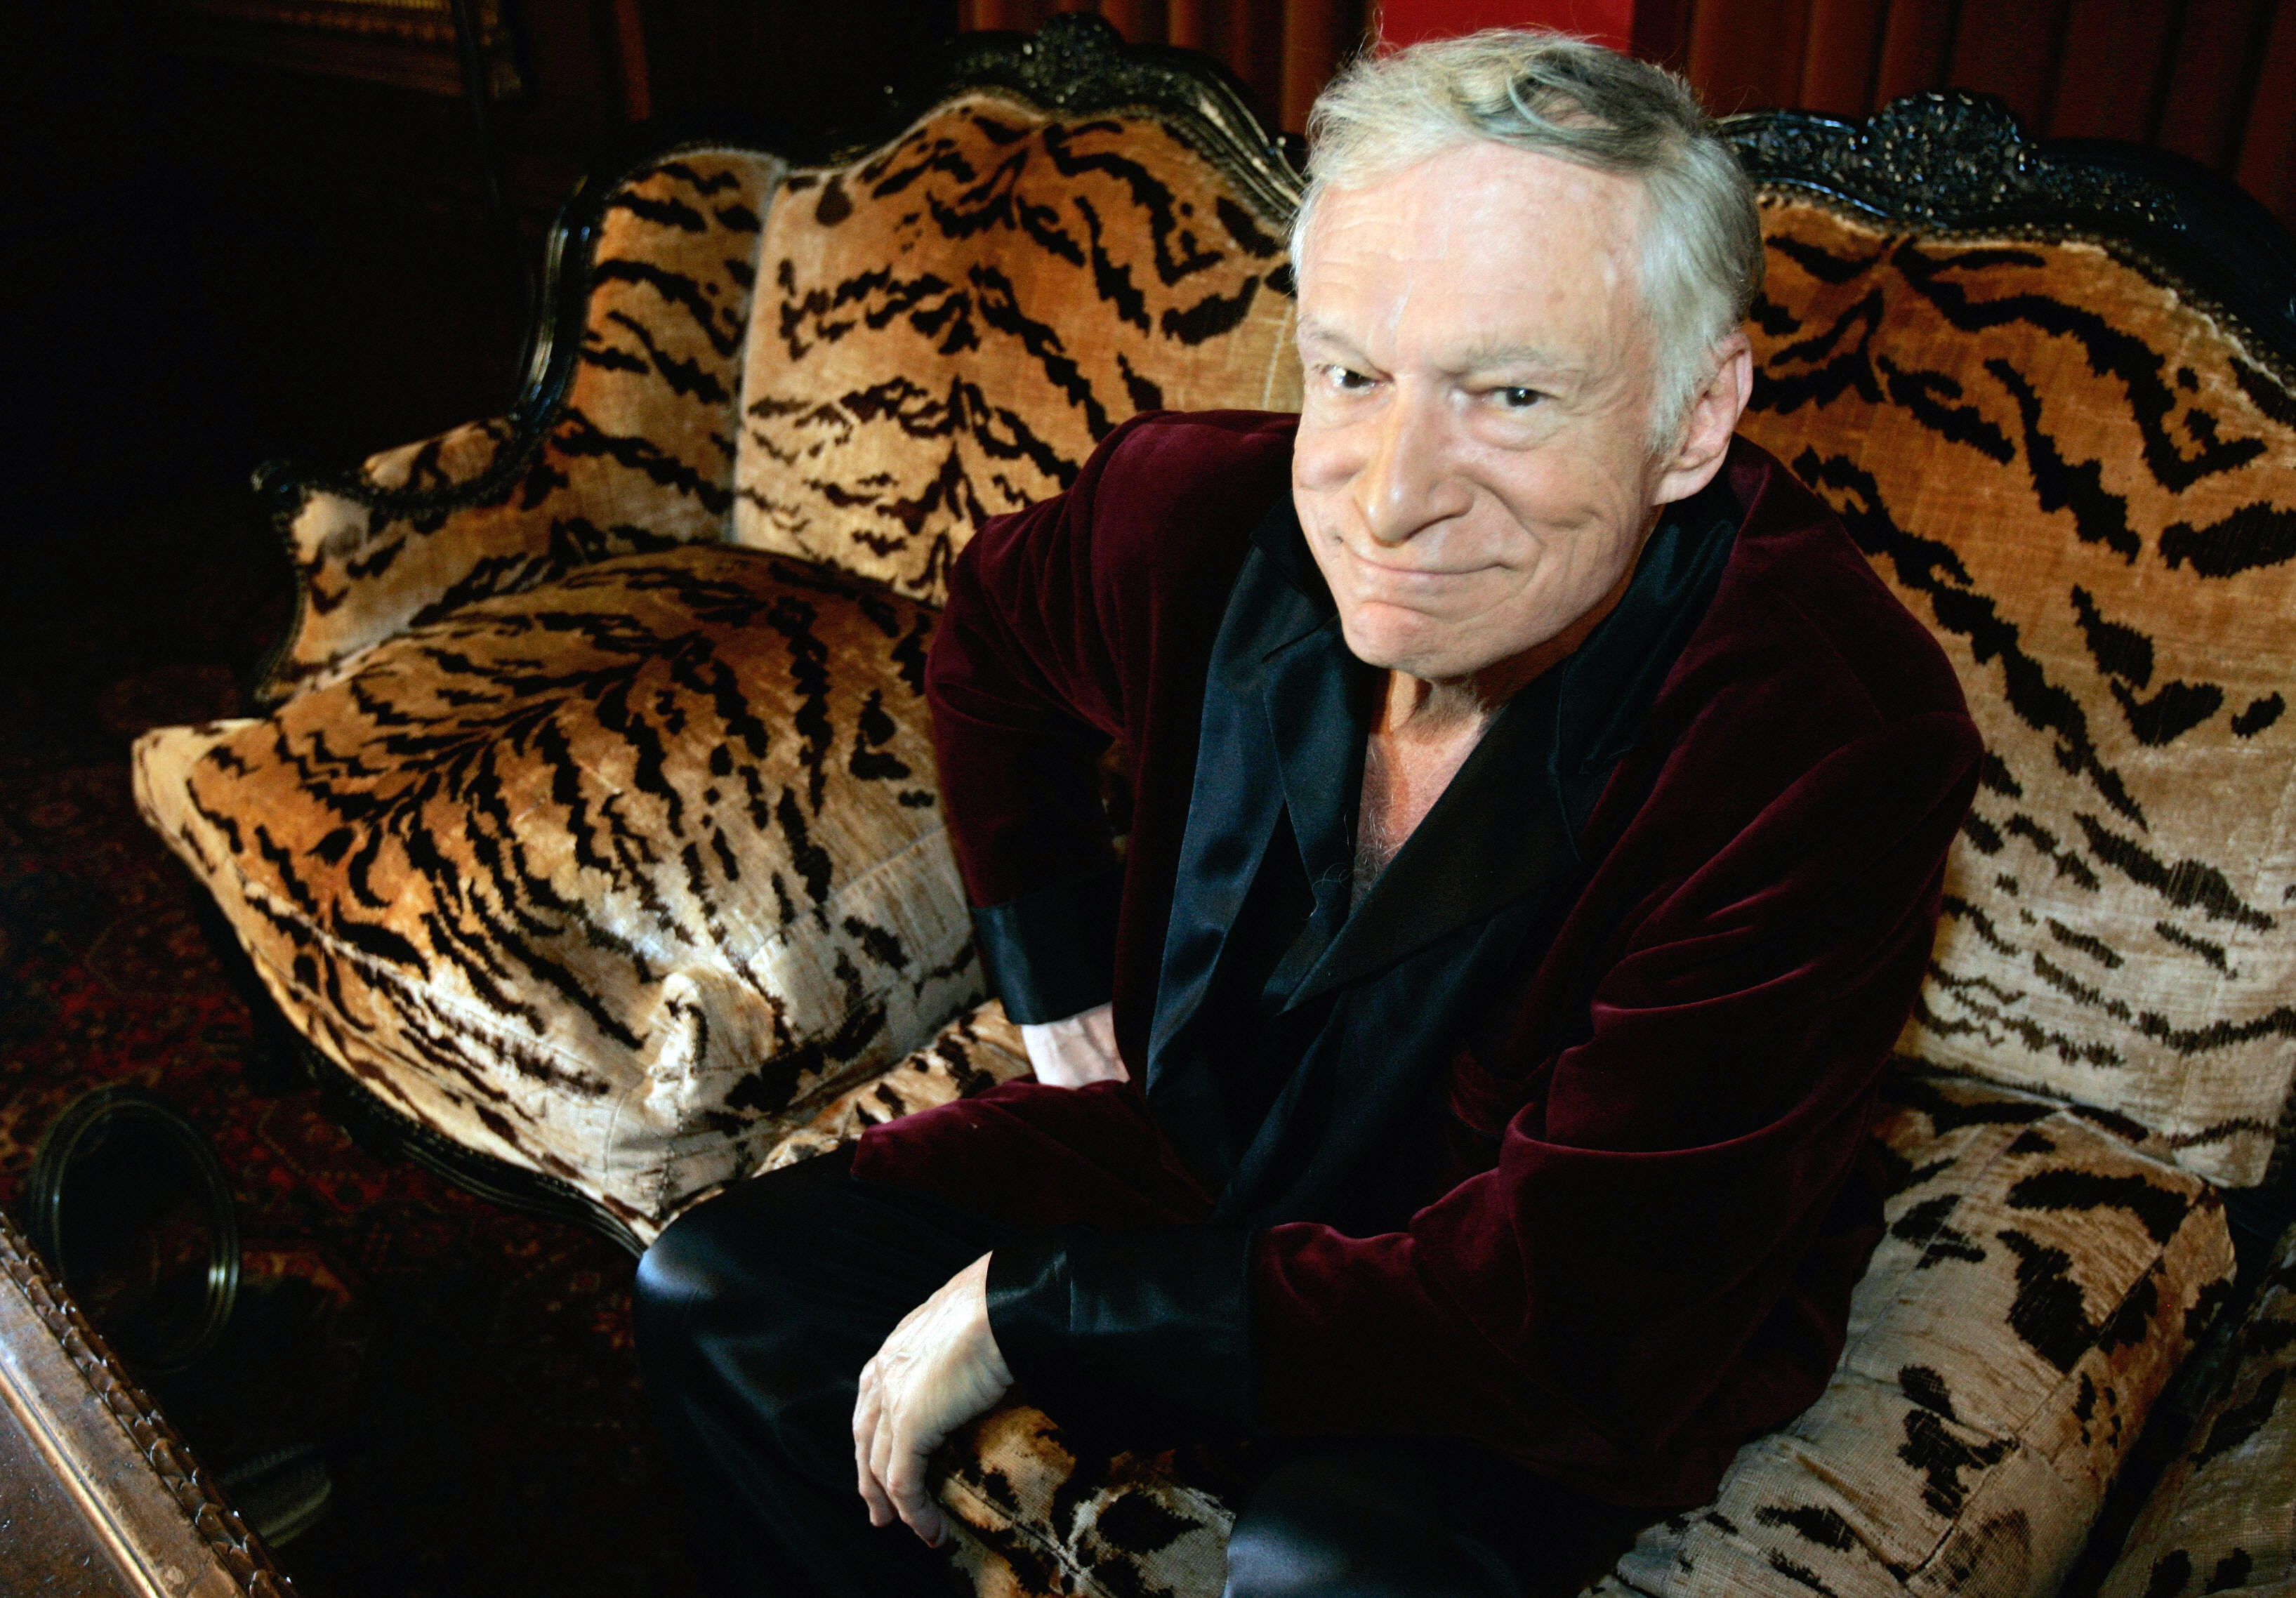 Close-up of Hugh sitting on a tiger-print couch